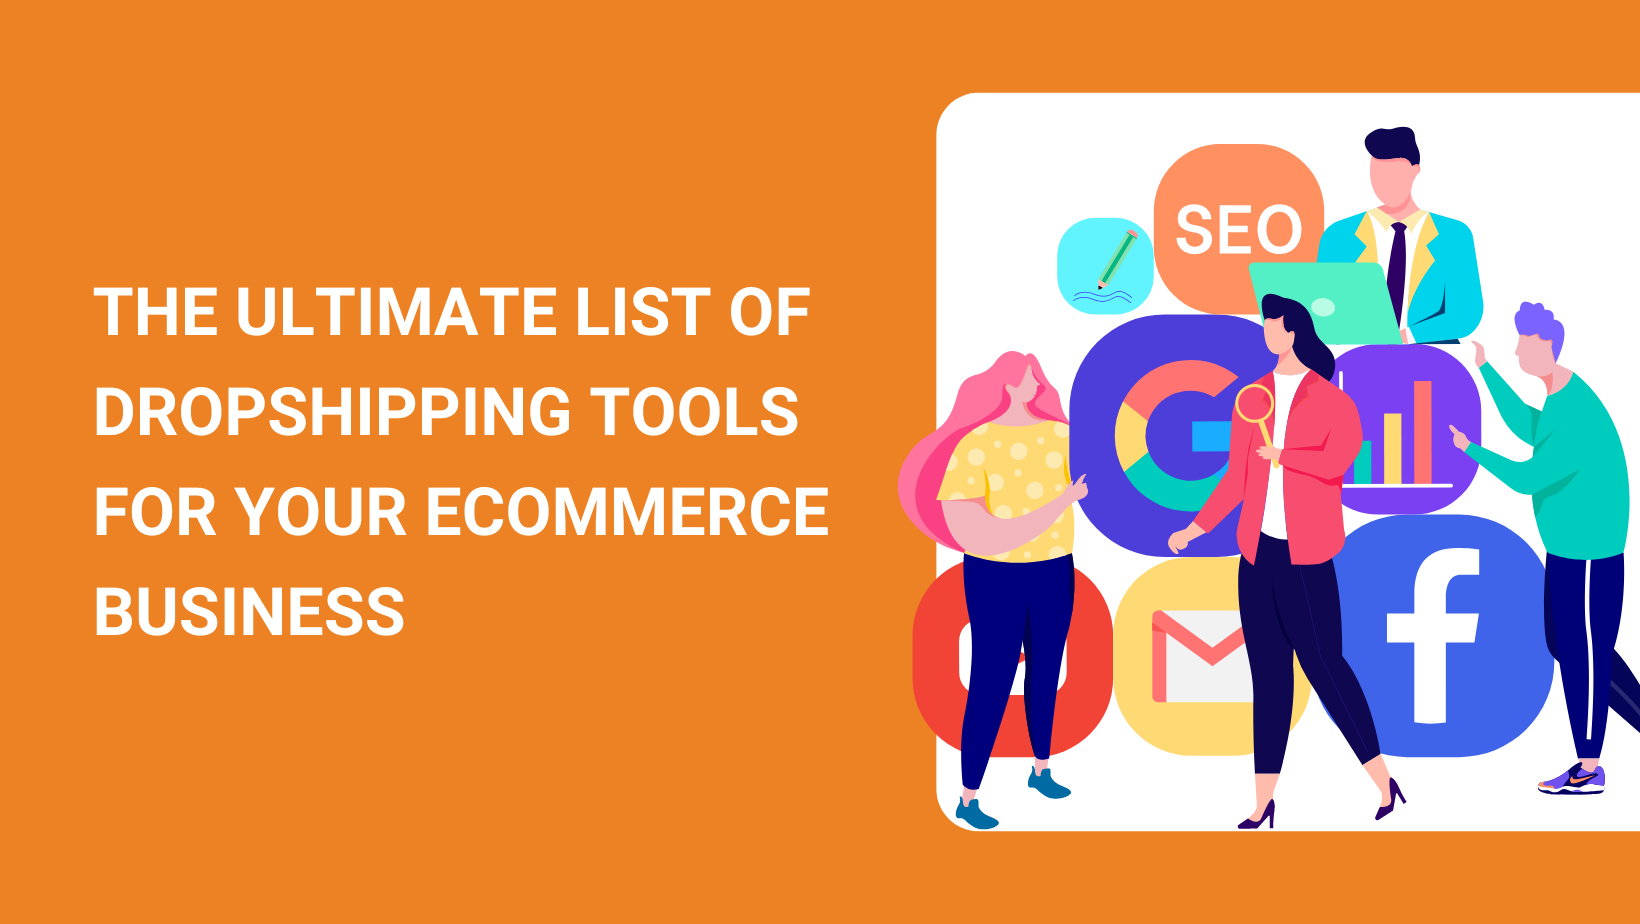 THE ULTIMATE LIST OF DROPSHIPPING TOOLS FOR YOUR ECOMMERCE BUSINESS